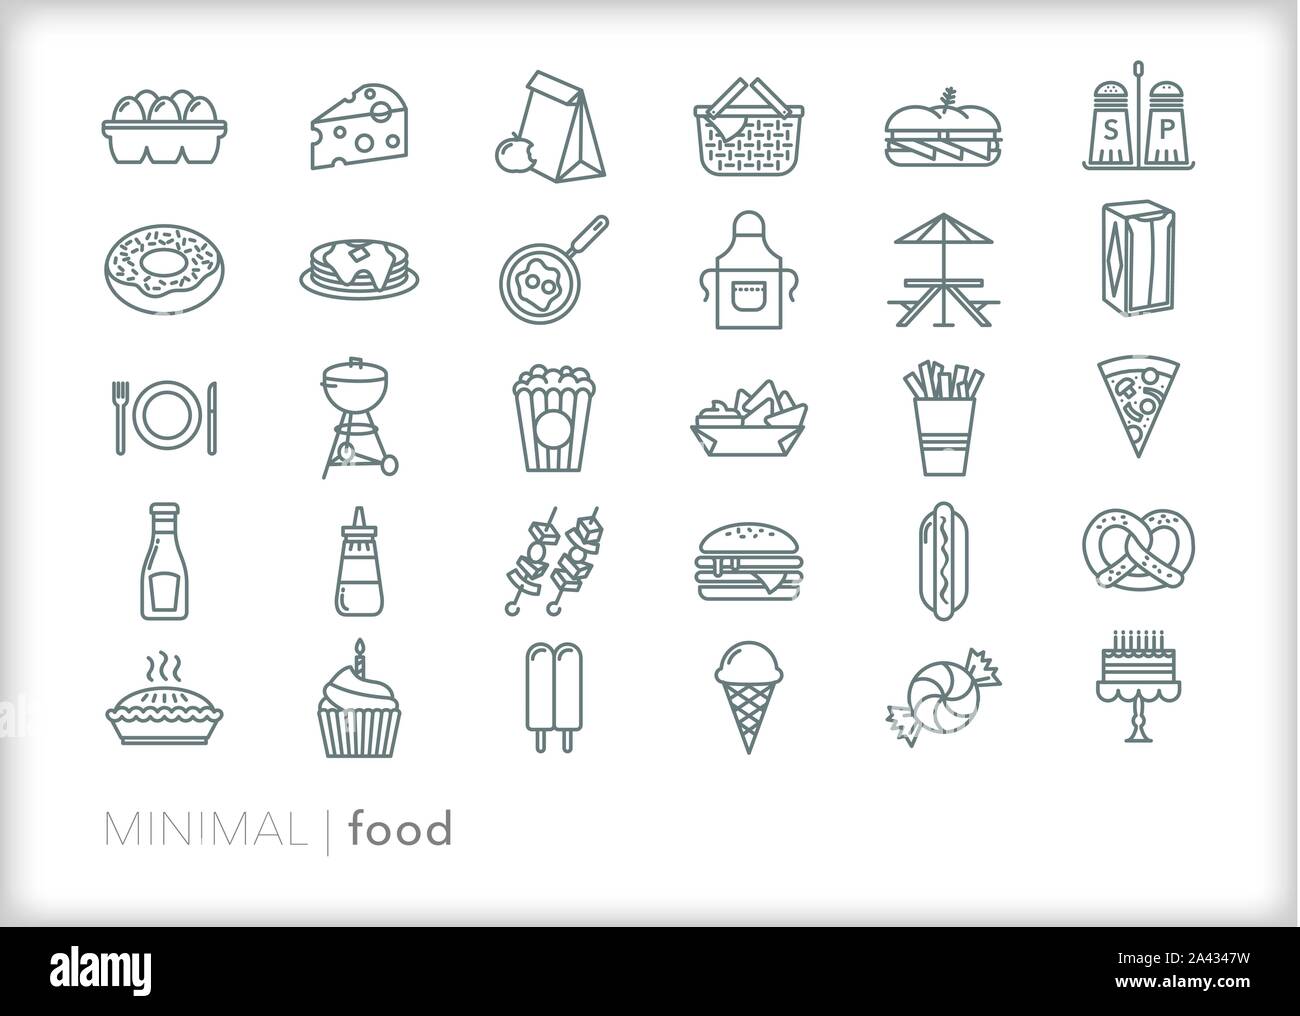 Set of 30 food line icons for meals, snacks, home cooking and restaurants Stock Vector